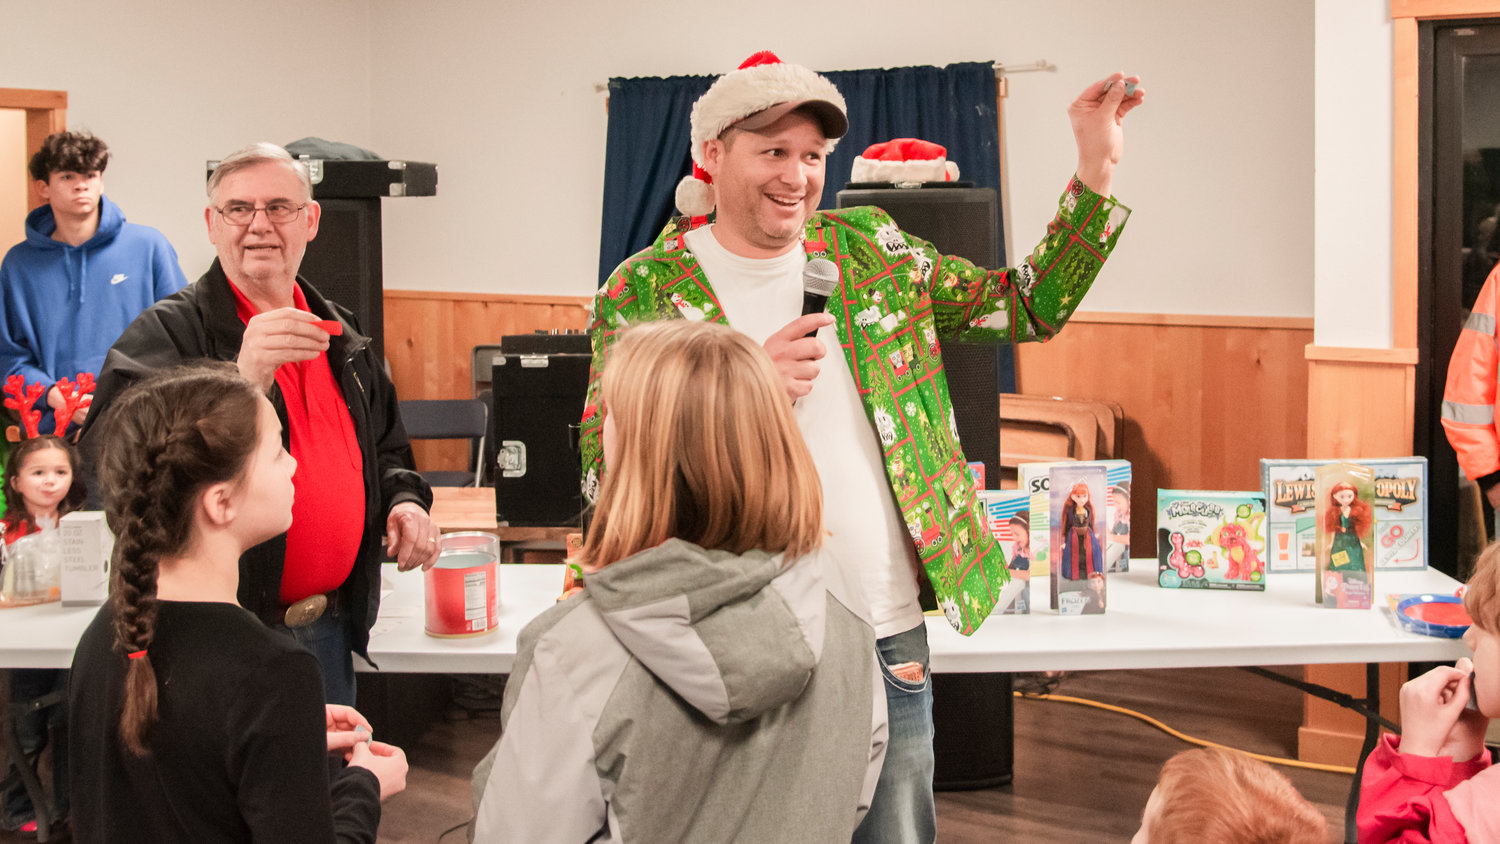 Mossyrock Mayor Randall Sasser and another man draw tickets for a gift raffle inside the Mossyrock Community Center during a tree lighting ceremony Saturday night.